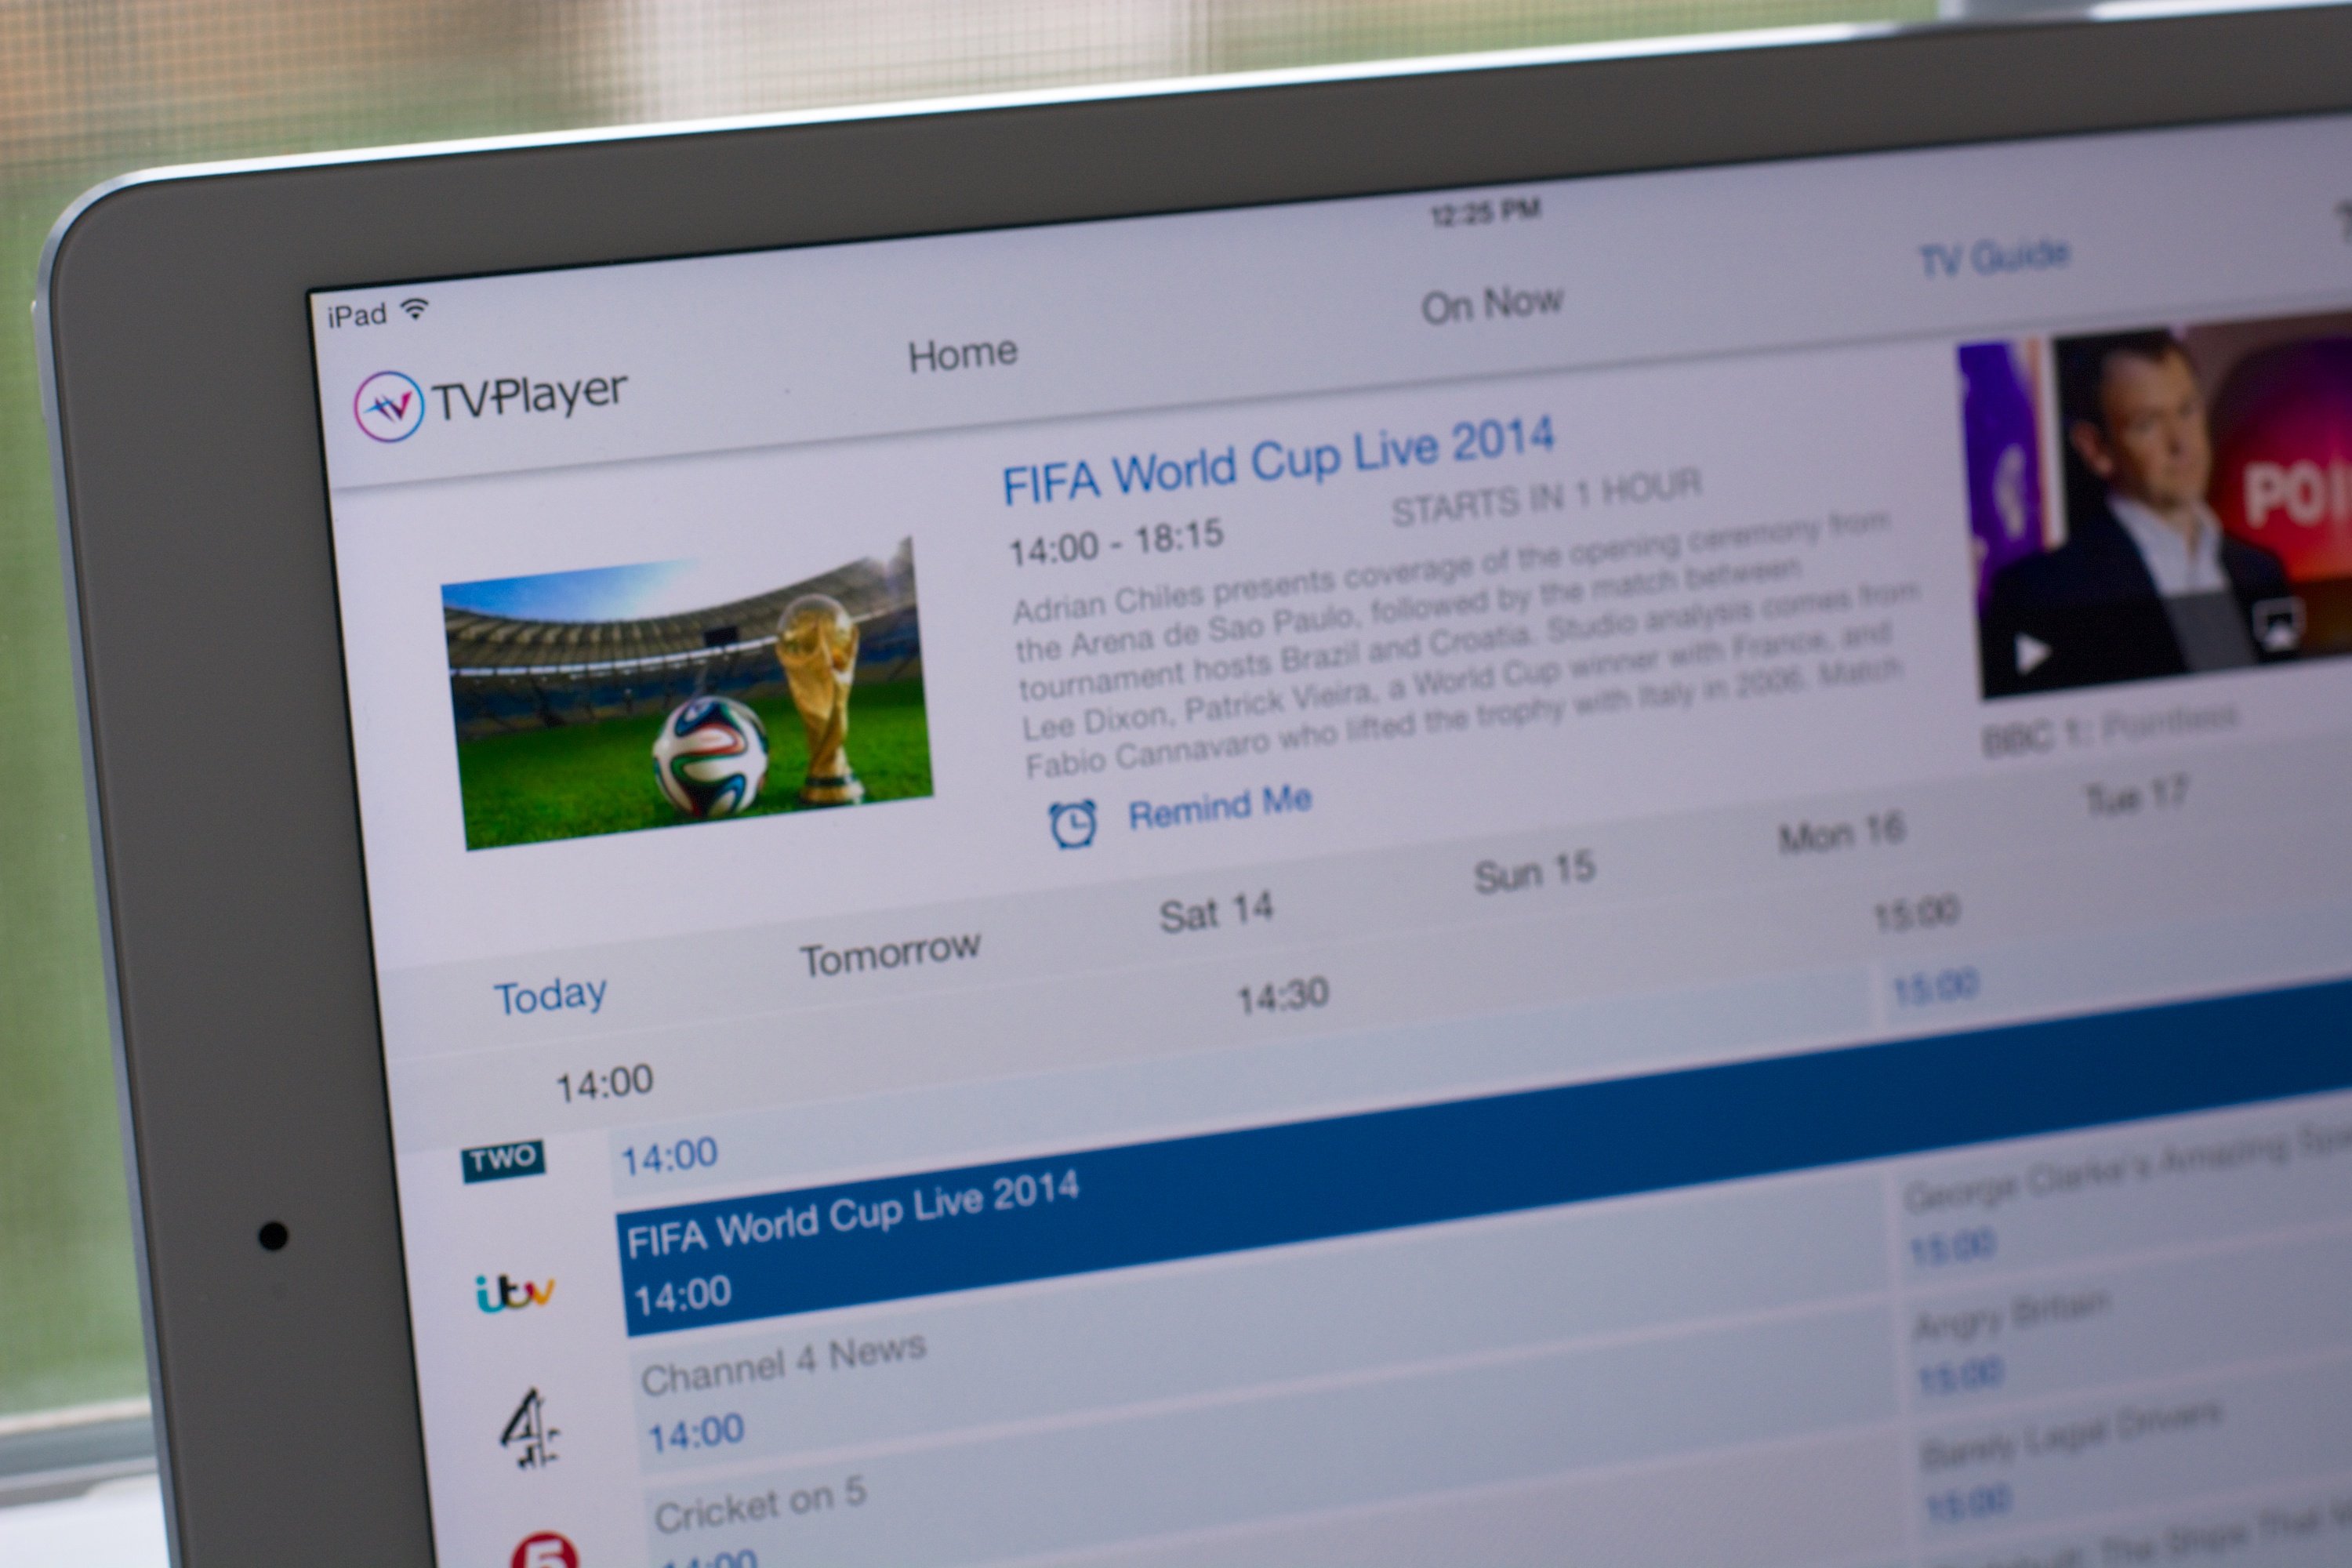 Here's how to watch the World Cup 2014 free from anywhere on almost any device.